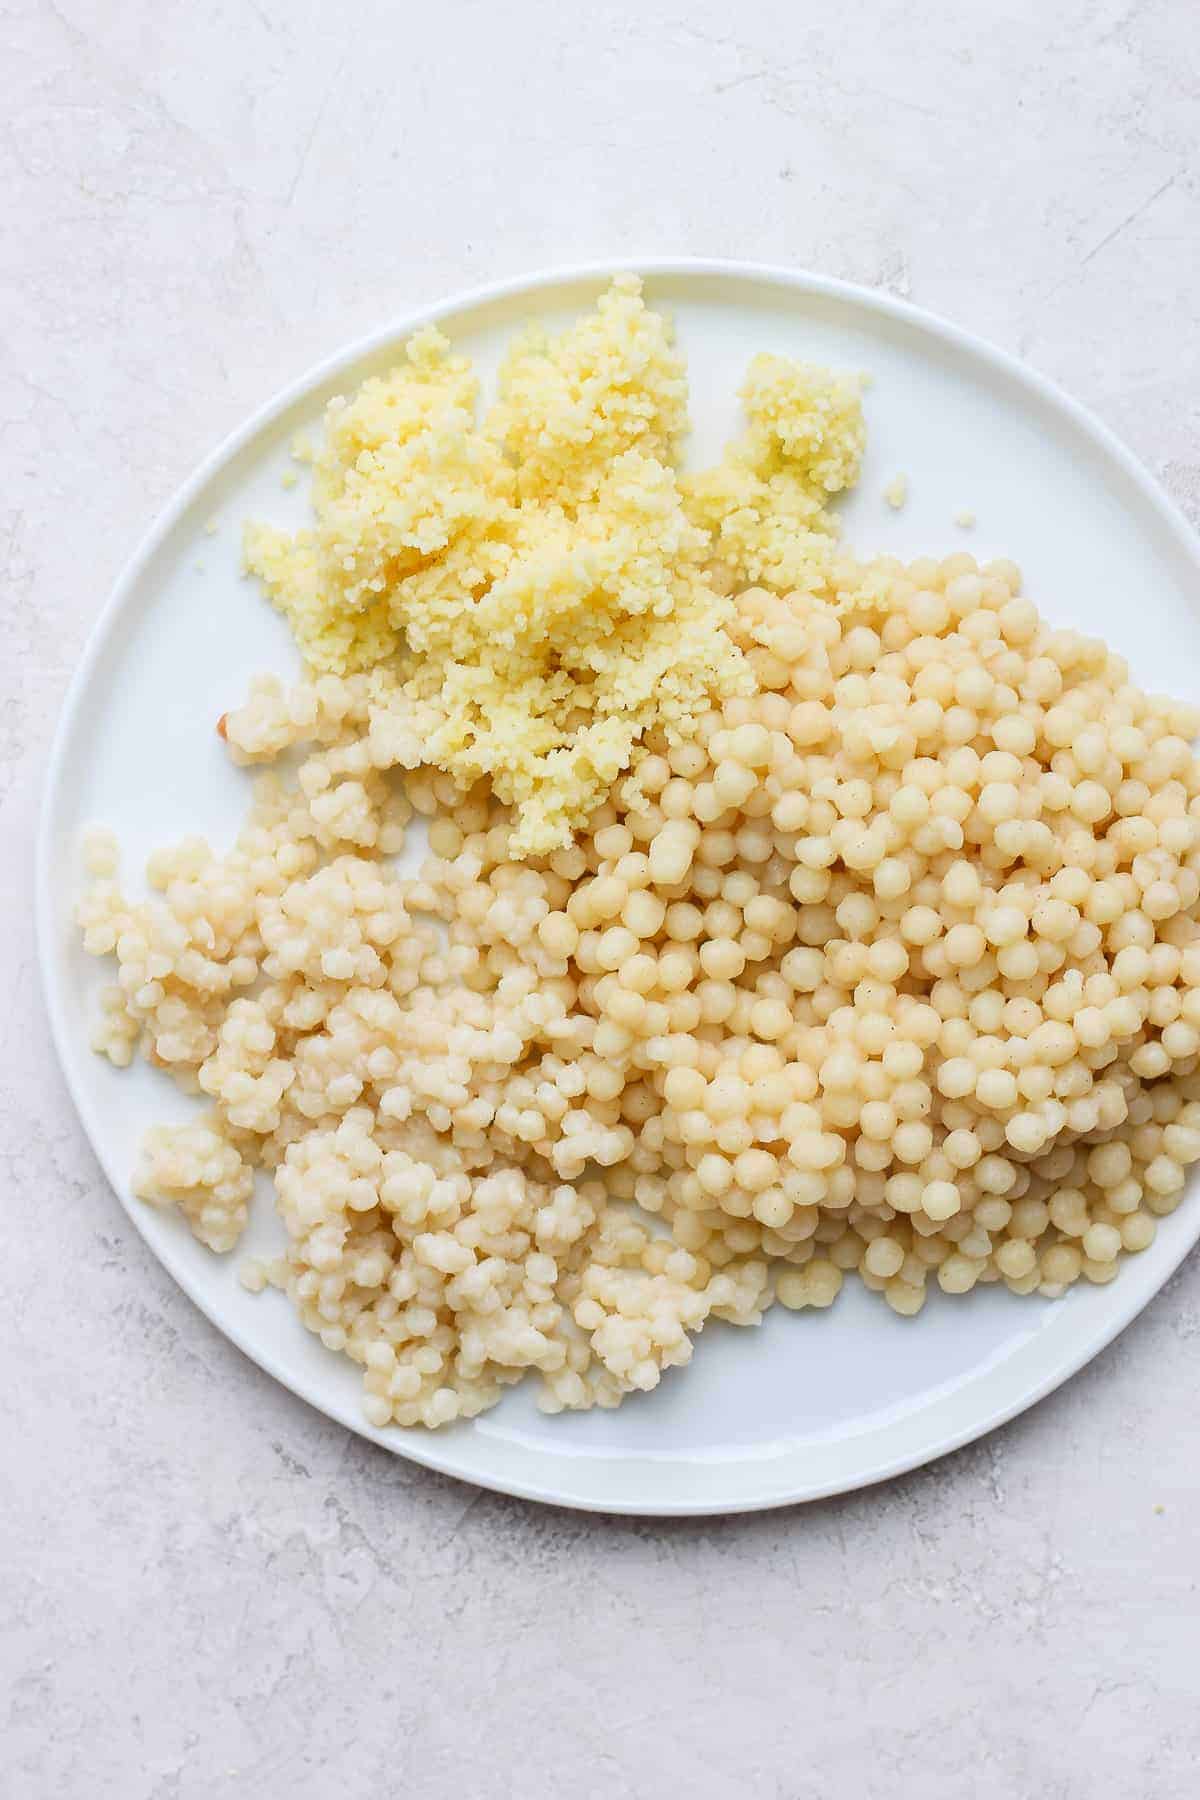 Three types of couscous on a white plate after cooking